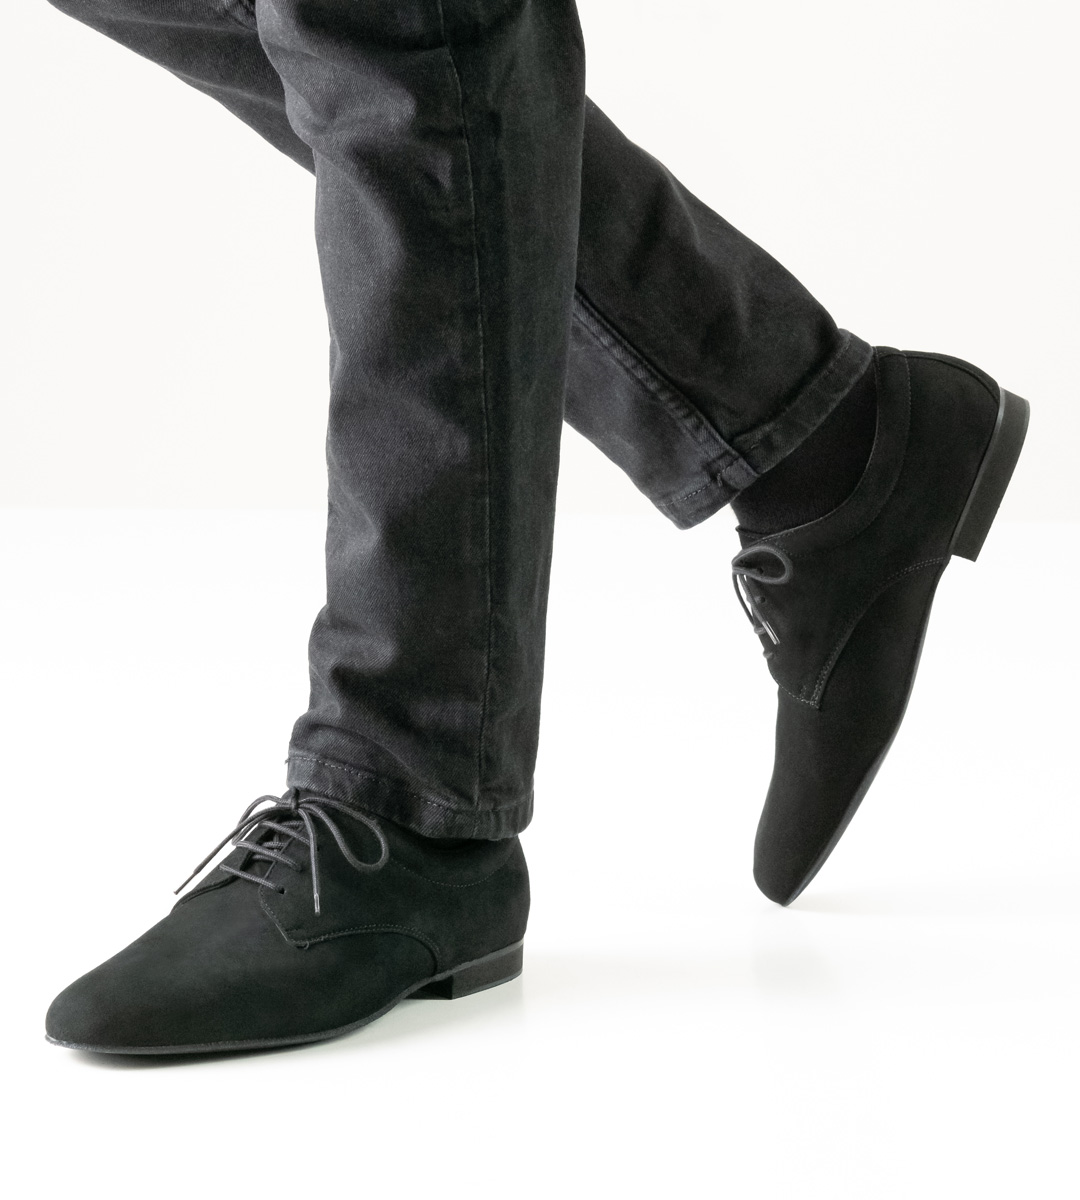 black jeans in combination with 1.5 cm high men's dance shoes by Werner Kern